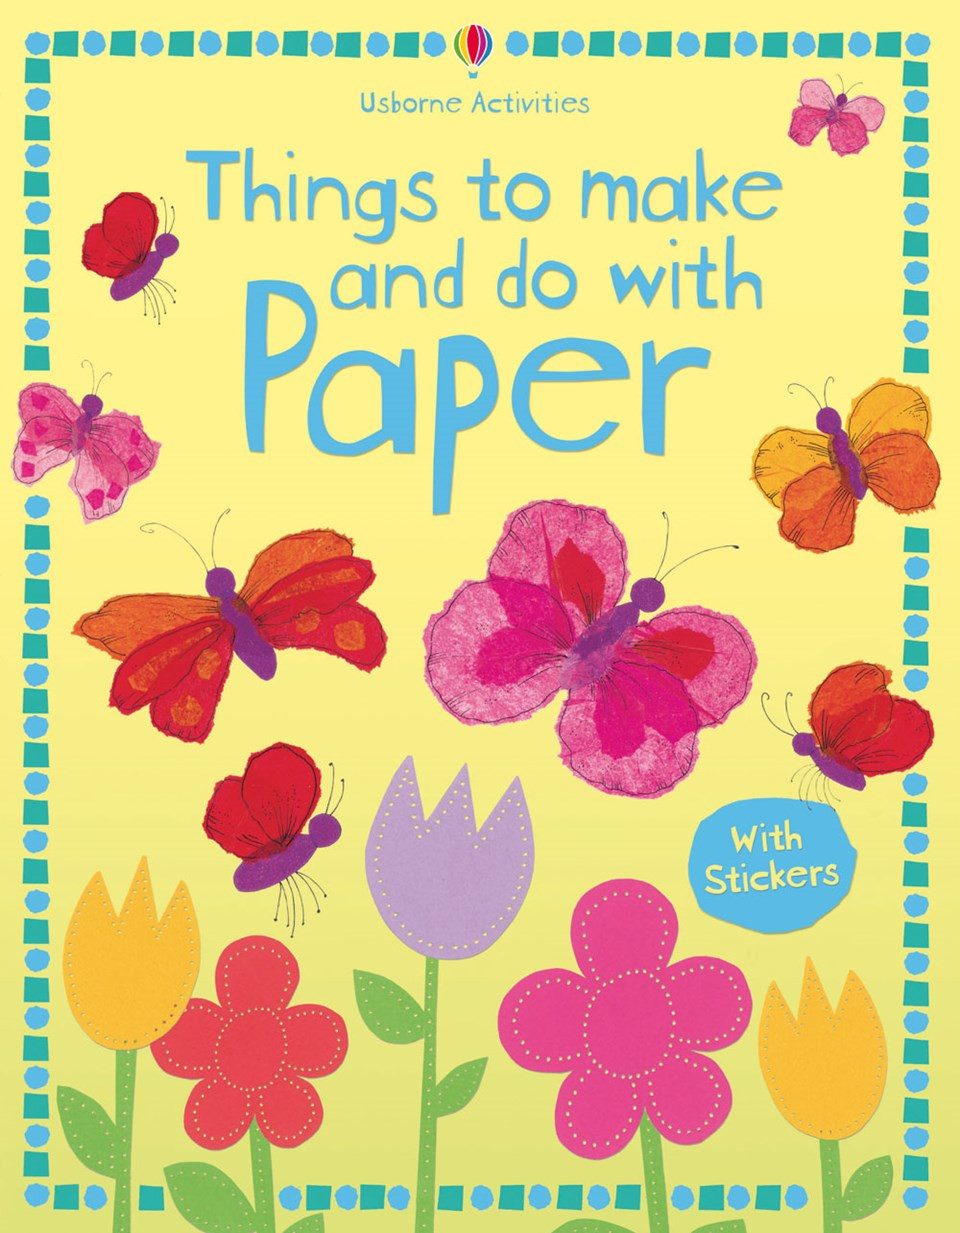 Things To Make With Kids
 “Things to make and do with paper” at Usborne Children’s Books